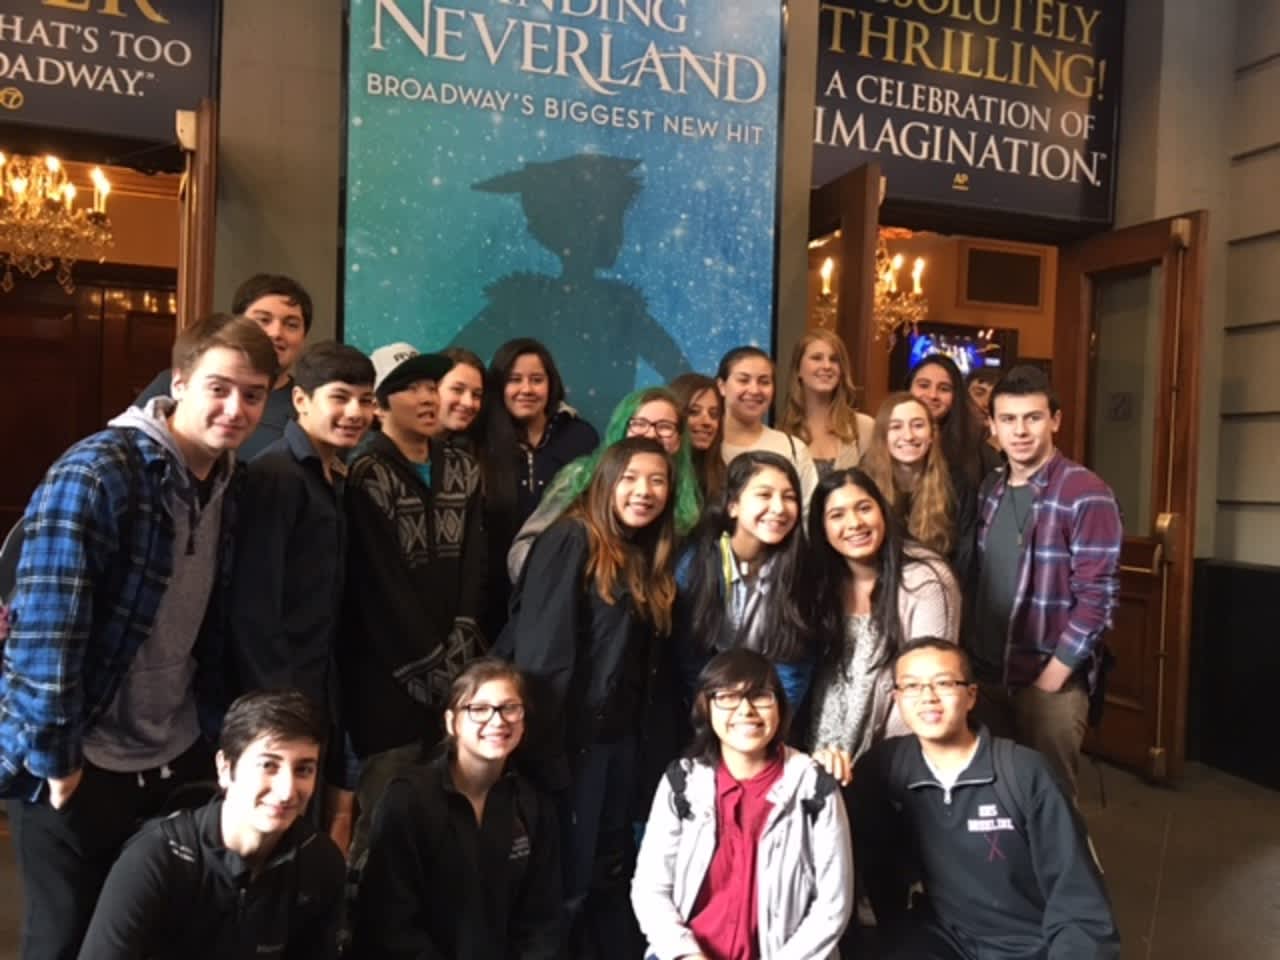 Harrison High School students took in a workshop and watched "Finding Neverland."